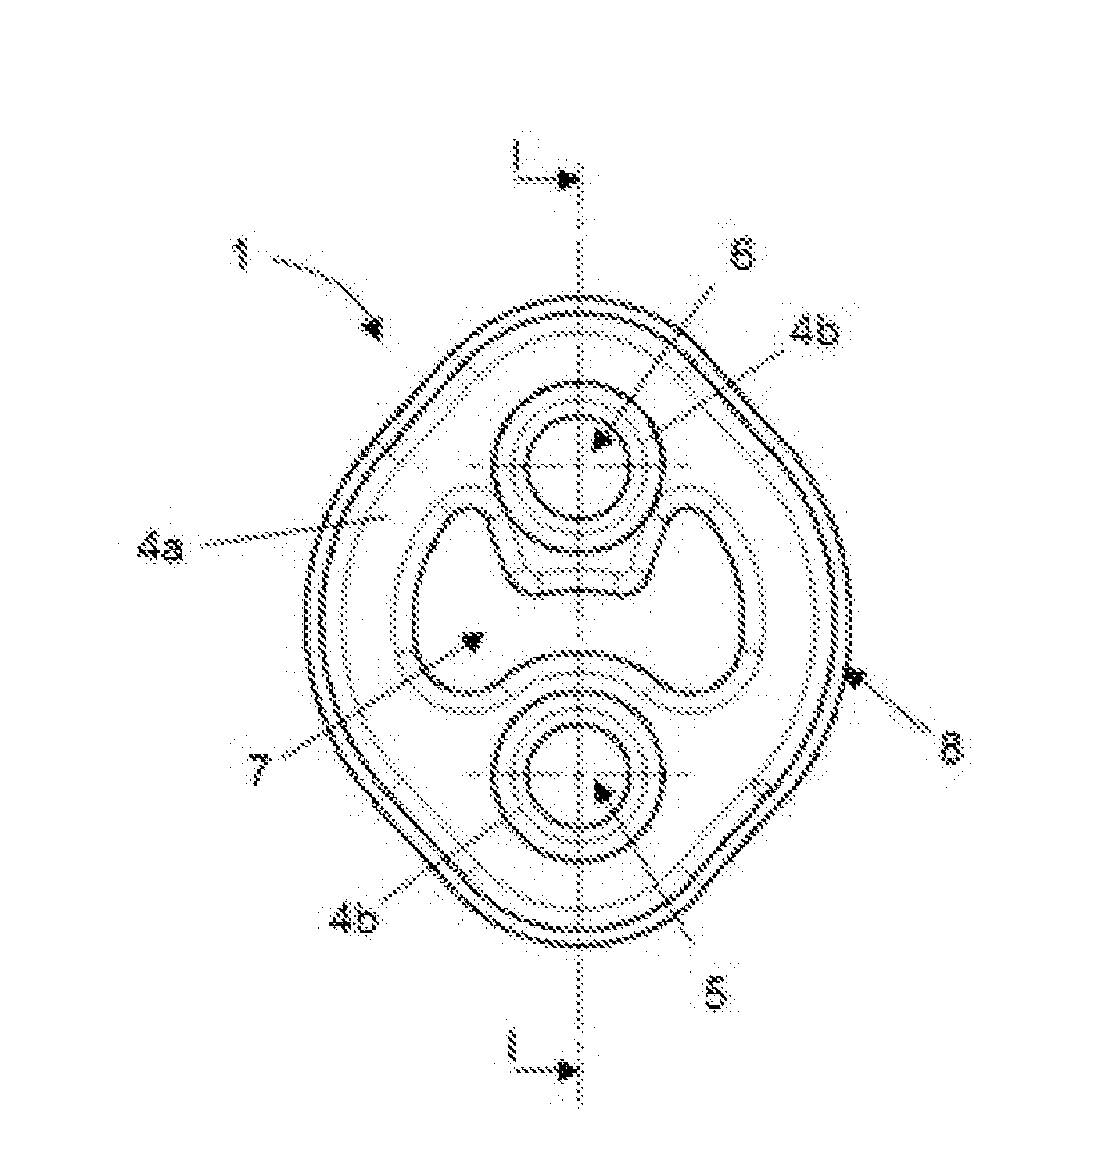 Shock-absorber and method for manufacturing a shock-absorber